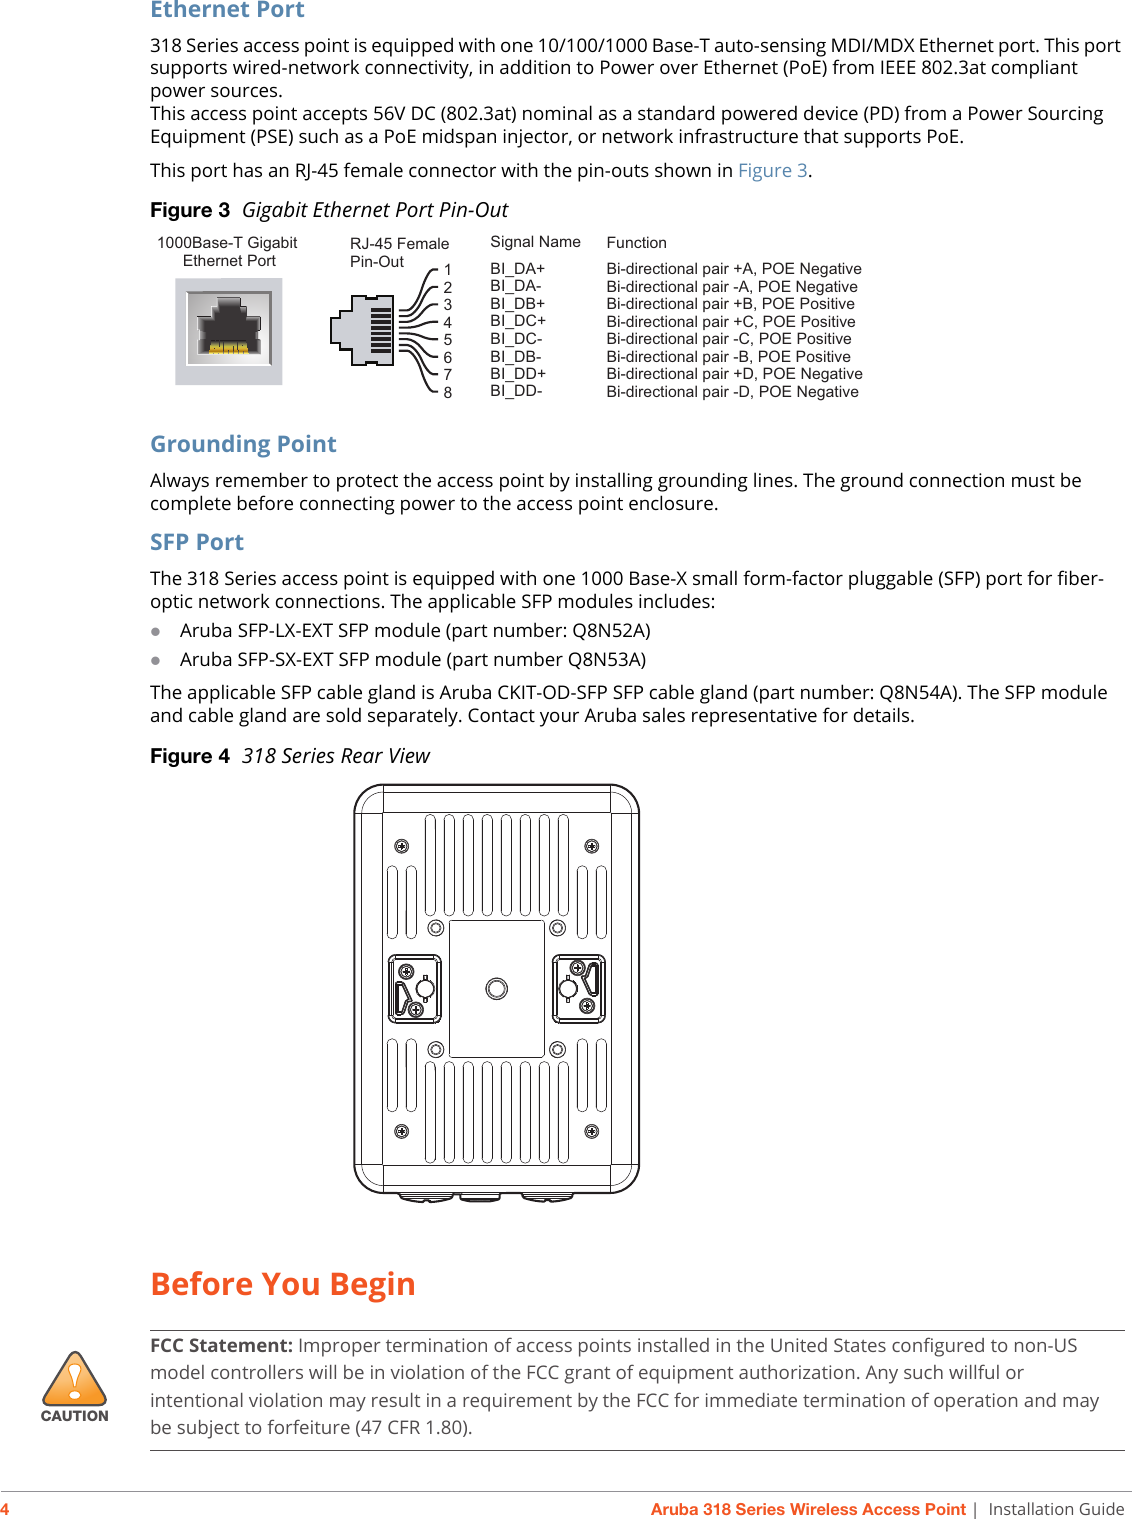 4Aruba 318 Series Wireless Access Point | Installation GuideEthernet Port318 Series access point is equipped with one 10/100/1000 Base-T auto-sensing MDI/MDX Ethernet port. This port supports wired-network connectivity, in addition to Power over Ethernet (PoE) from IEEE 802.3at compliant power sources.This access point accepts 56V DC (802.3at) nominal as a standard powered device (PD) from a Power Sourcing Equipment (PSE) such as a PoE midspan injector, or network infrastructure that supports PoE.This port has an RJ-45 female connector with the pin-outs shown in Figure 3. Figure 3  Gigabit Ethernet Port Pin-OutGrounding PointAlways remember to protect the access point by installing grounding lines. The ground connection must be complete before connecting power to the access point enclosure. SFP PortThe 318 Series access point is equipped with one 1000 Base-X small form-factor pluggable (SFP) port for fiber-optic network connections. The applicable SFP modules includes:Aruba SFP-LX-EXT SFP module (part number: Q8N52A)Aruba SFP-SX-EXT SFP module (part number Q8N53A) The applicable SFP cable gland is Aruba CKIT-OD-SFP SFP cable gland (part number: Q8N54A). The SFP module and cable gland are sold separately. Contact your Aruba sales representative for details.Figure 4  318 Series Rear ViewBefore You Begin1000Base-T Gigabit Ethernet PortRJ-45 FemalePin-OutSignal Name12345678BI_DC+BI_DC-BI_DD+BI_DD-BI_DA+BI_DA-BI_DB+BI_DB-FunctionBi-directional pair +C, POE PositiveBi-directional pair -C, POE PositiveBi-directional pair +D, POE NegativeBi-directional pair -D, POE NegativeBi-directional pair +A, POE NegativeBi-directional pair -A, POE NegativeBi-directional pair +B, POE PositiveBi-directional pair -B, POE Positive   !CAUTIONFCC Statement: Improper termination of access points installed in the United States configured to non-US model controllers will be in violation of the FCC grant of equipment authorization. Any such willful or intentional violation may result in a requirement by the FCC for immediate termination of operation and may be subject to forfeiture (47 CFR 1.80).